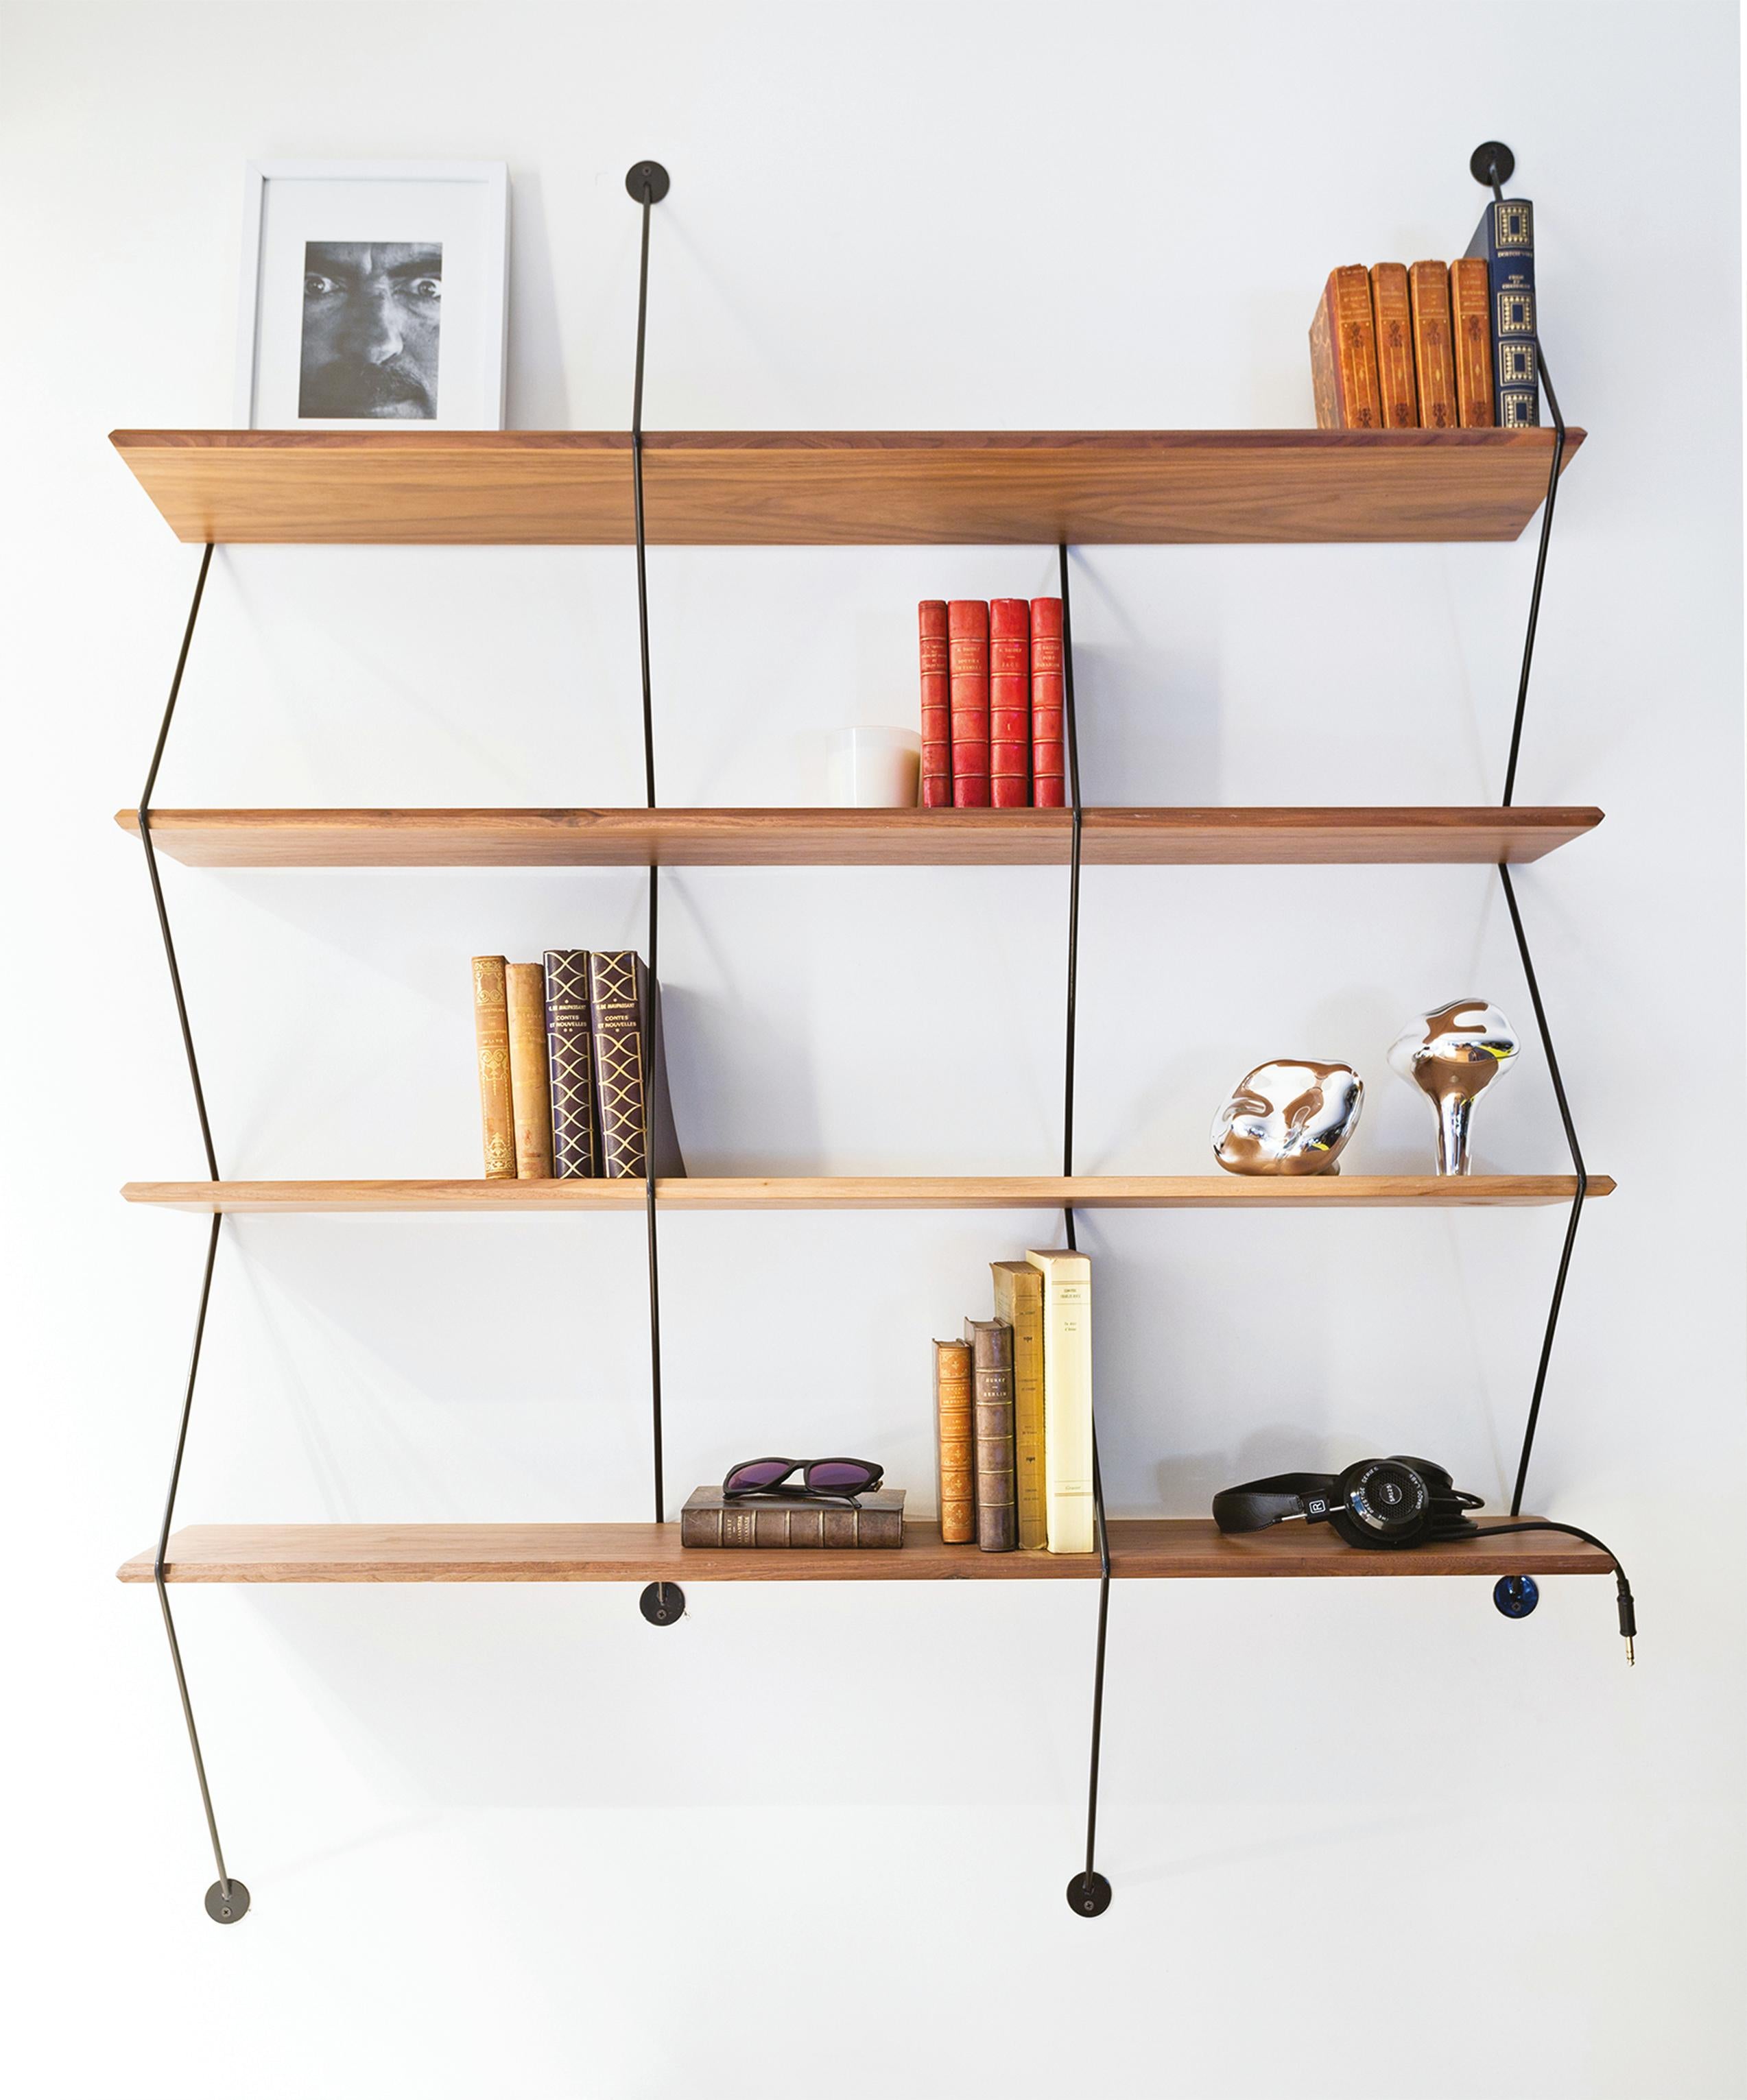 Climb is an ingenious shelving system made of beveled wooden boards supported by metal wires. Measure: 120 cm.
The design plays with the sensation of tension of the wires that grasps the wooden shelves and becomes a rigid structure as the product